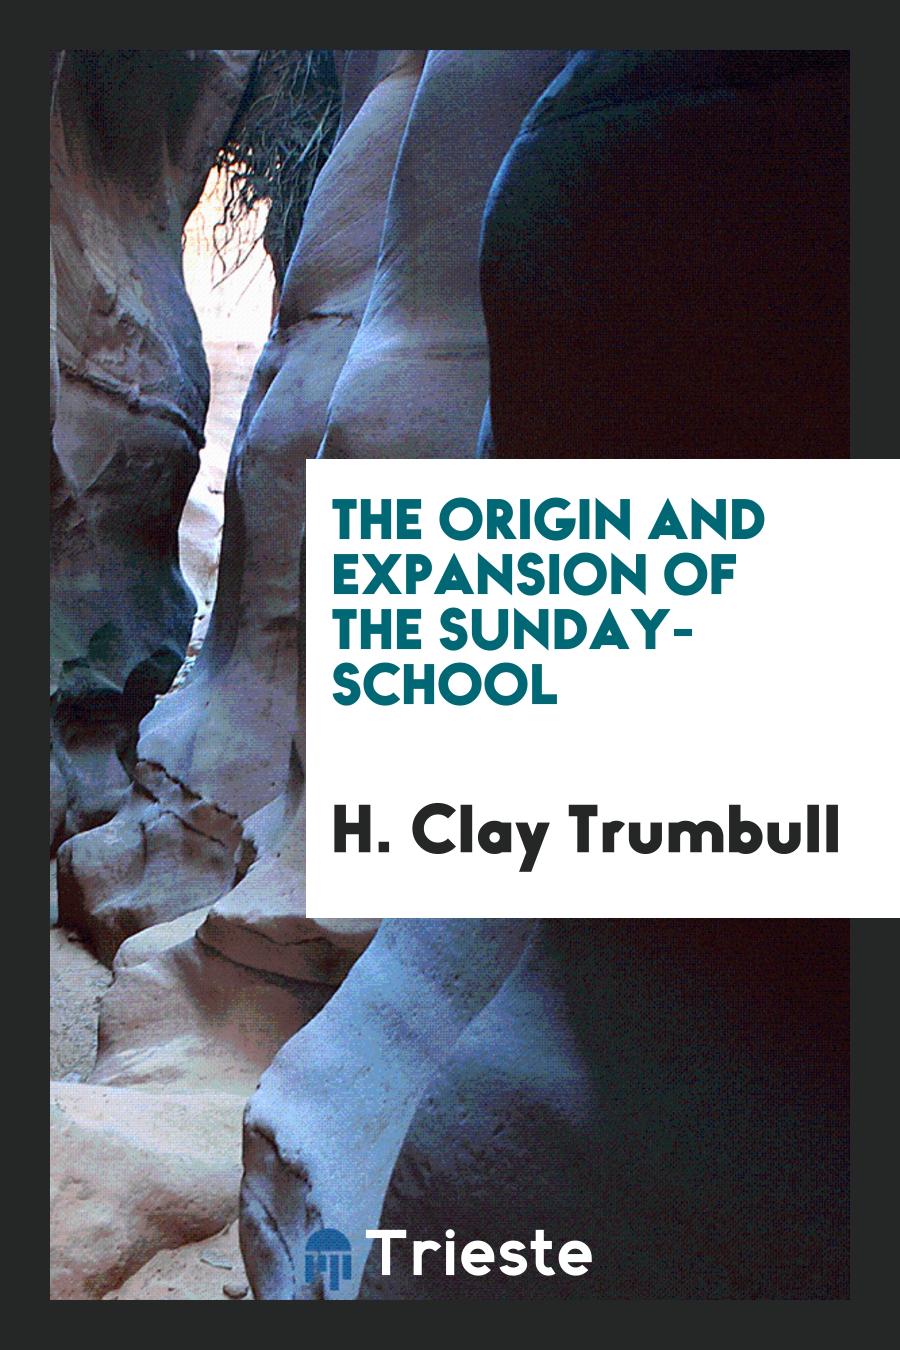 The Origin and Expansion of the Sunday-School